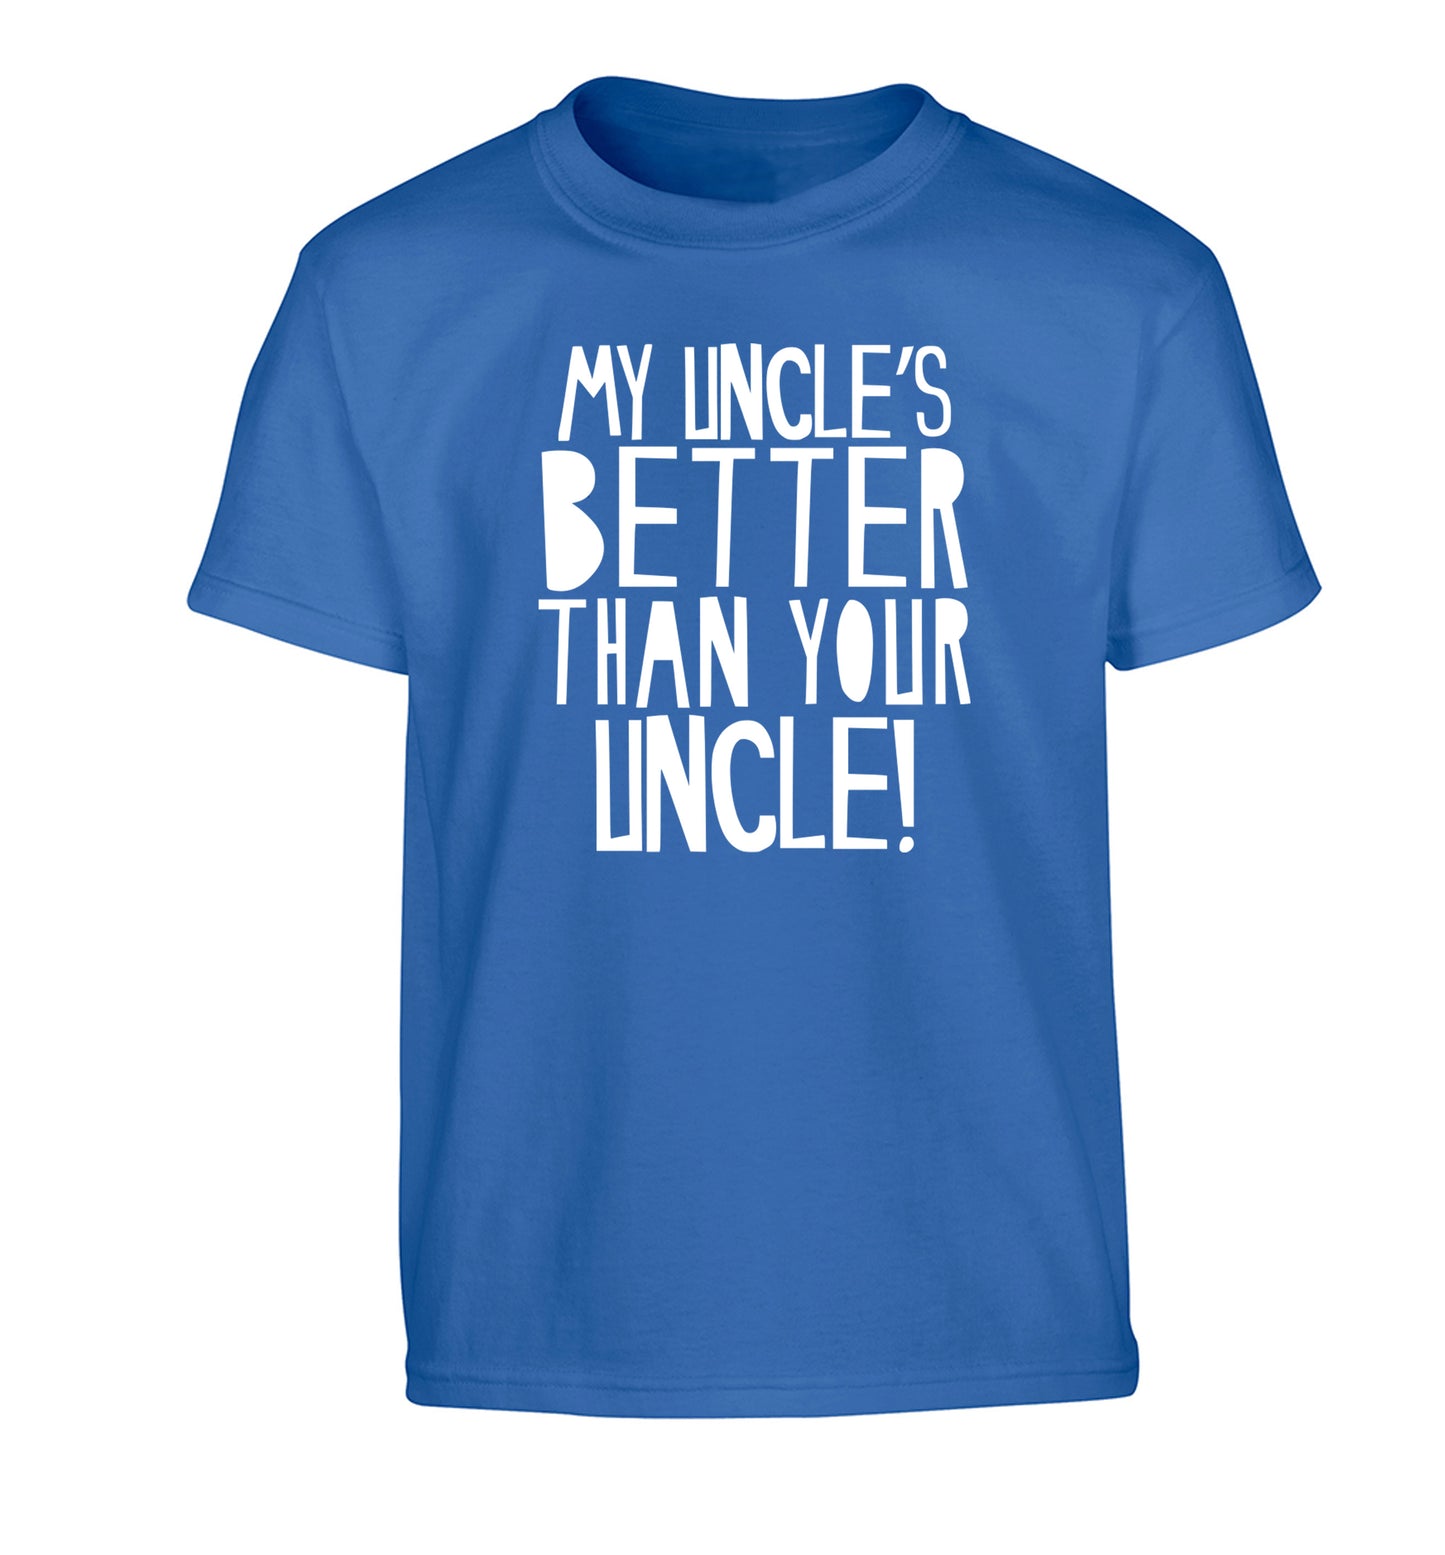 My uncles better than your uncle Children's blue Tshirt 12-13 Years